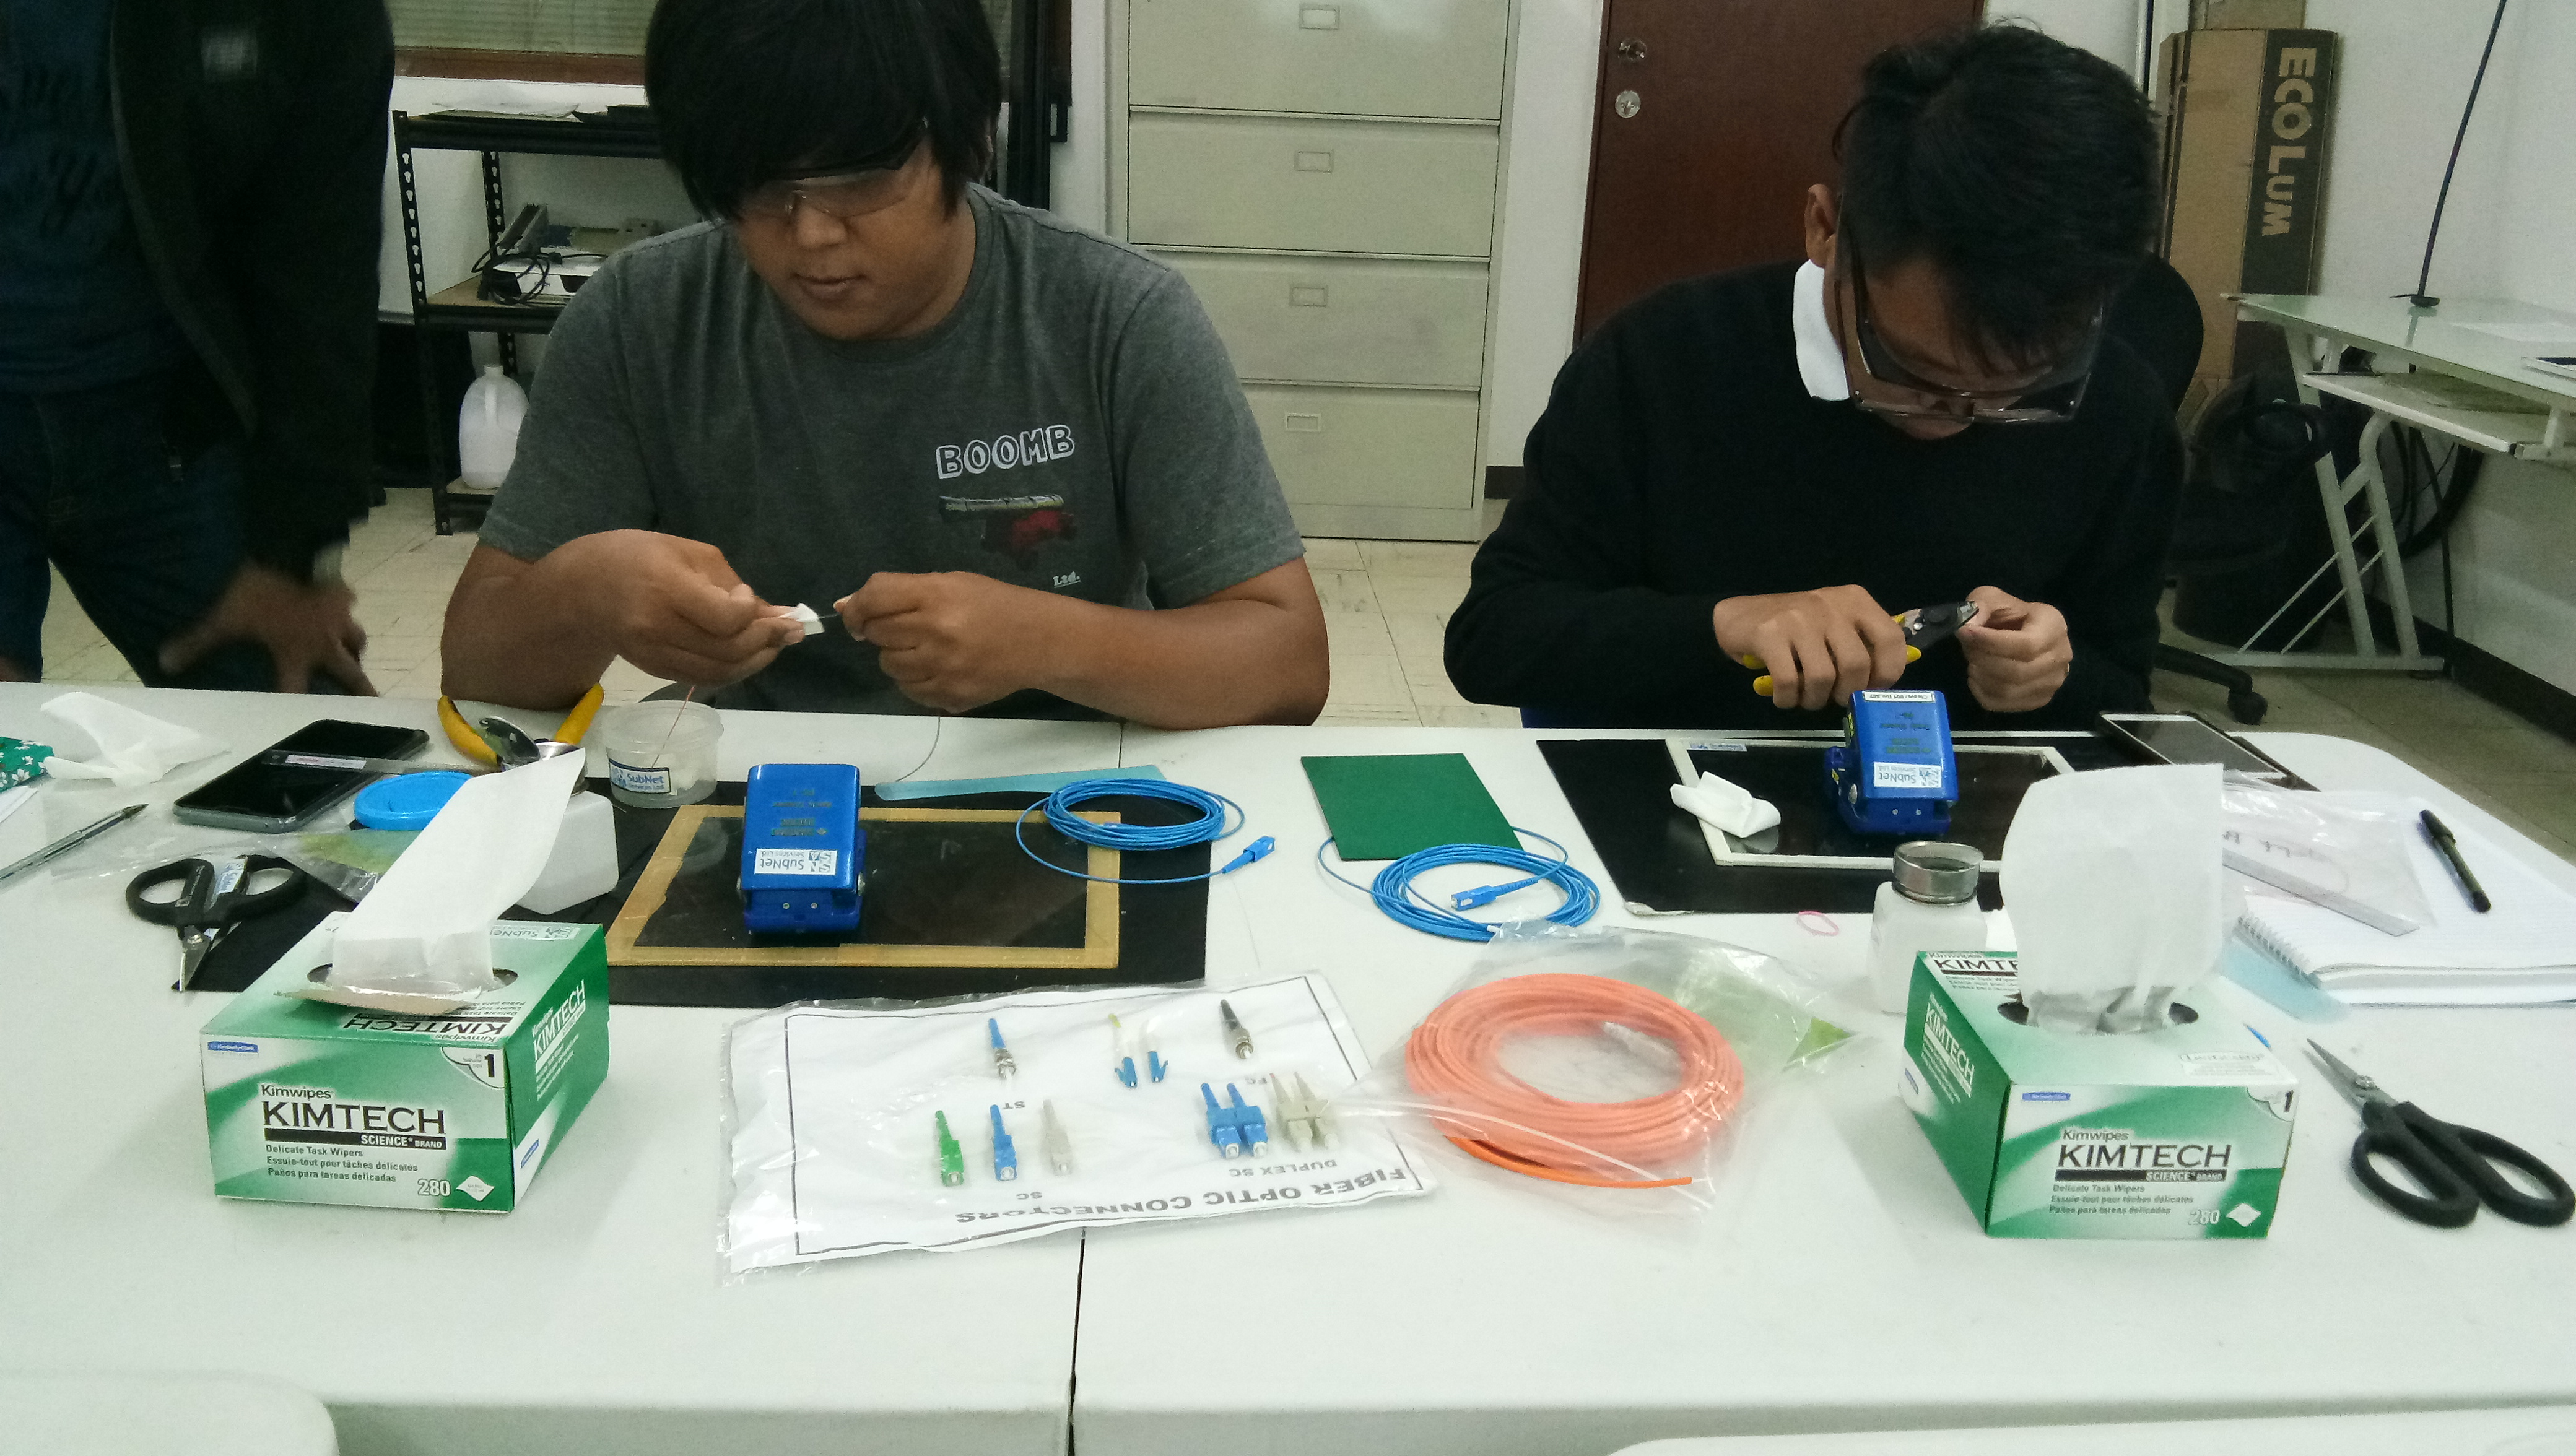 cfot trainees during a laboratory activity